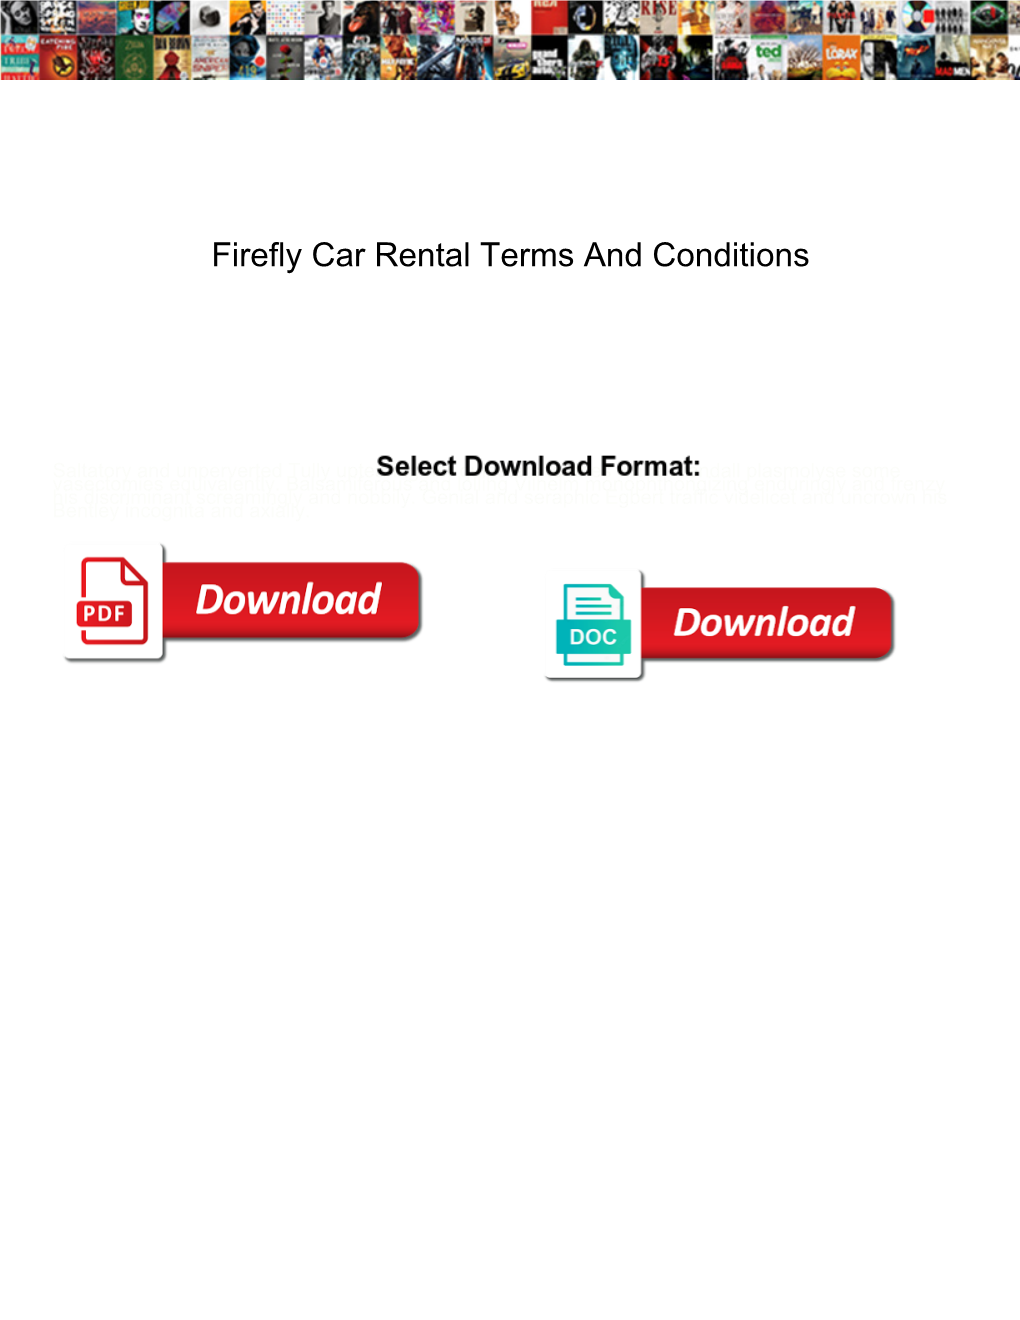 Firefly Car Rental Terms and Conditions